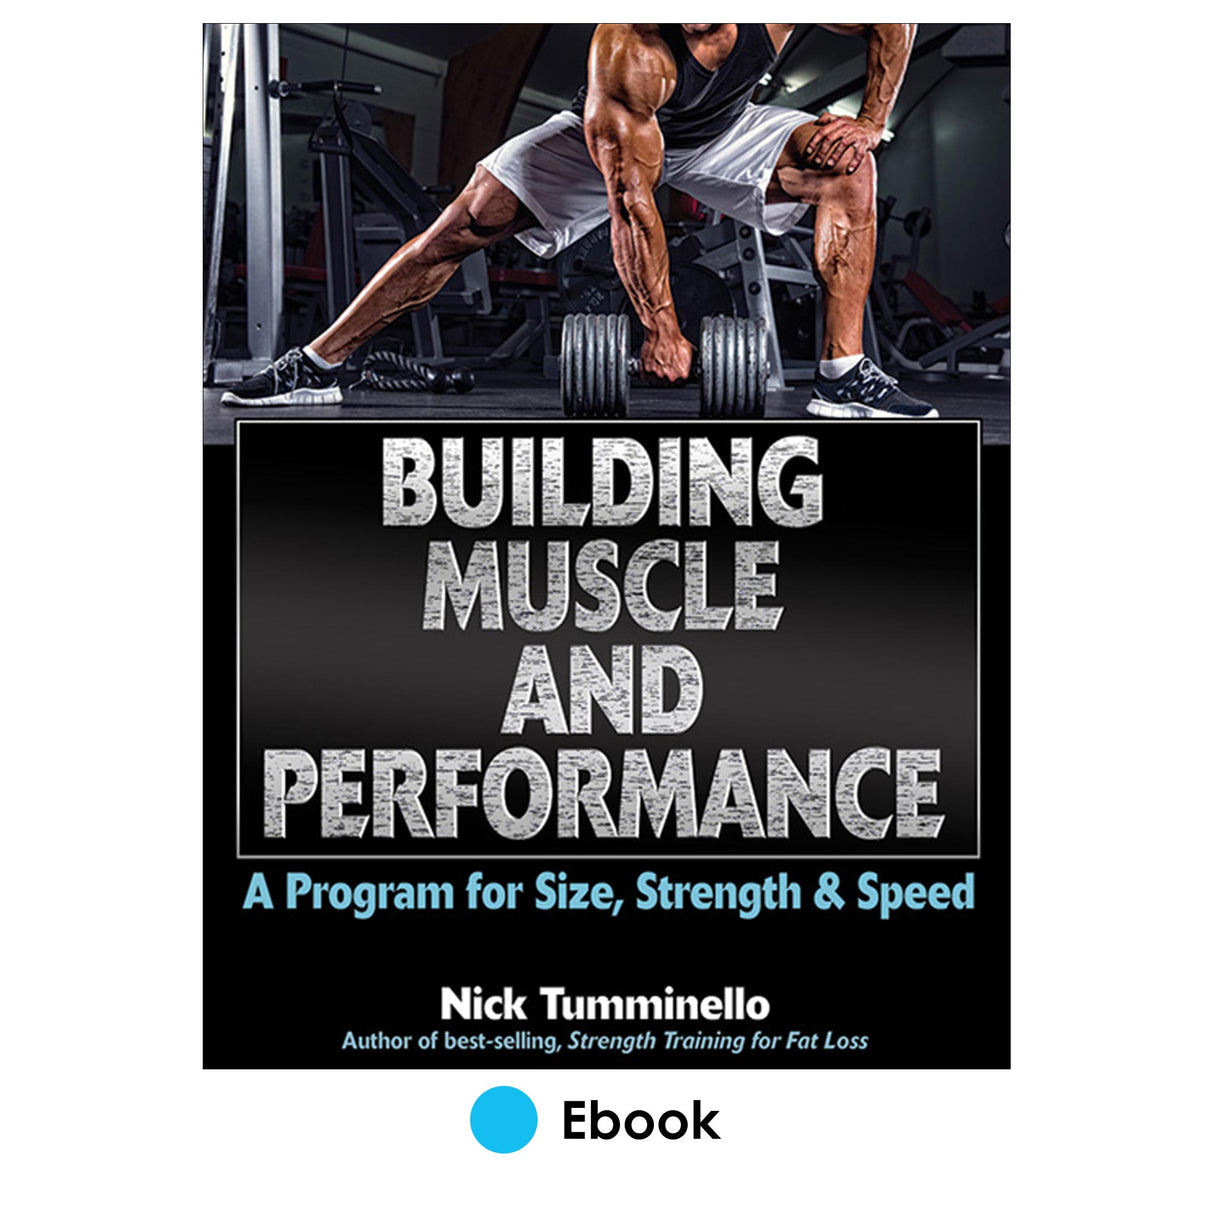 Building Muscle and Performance PDF